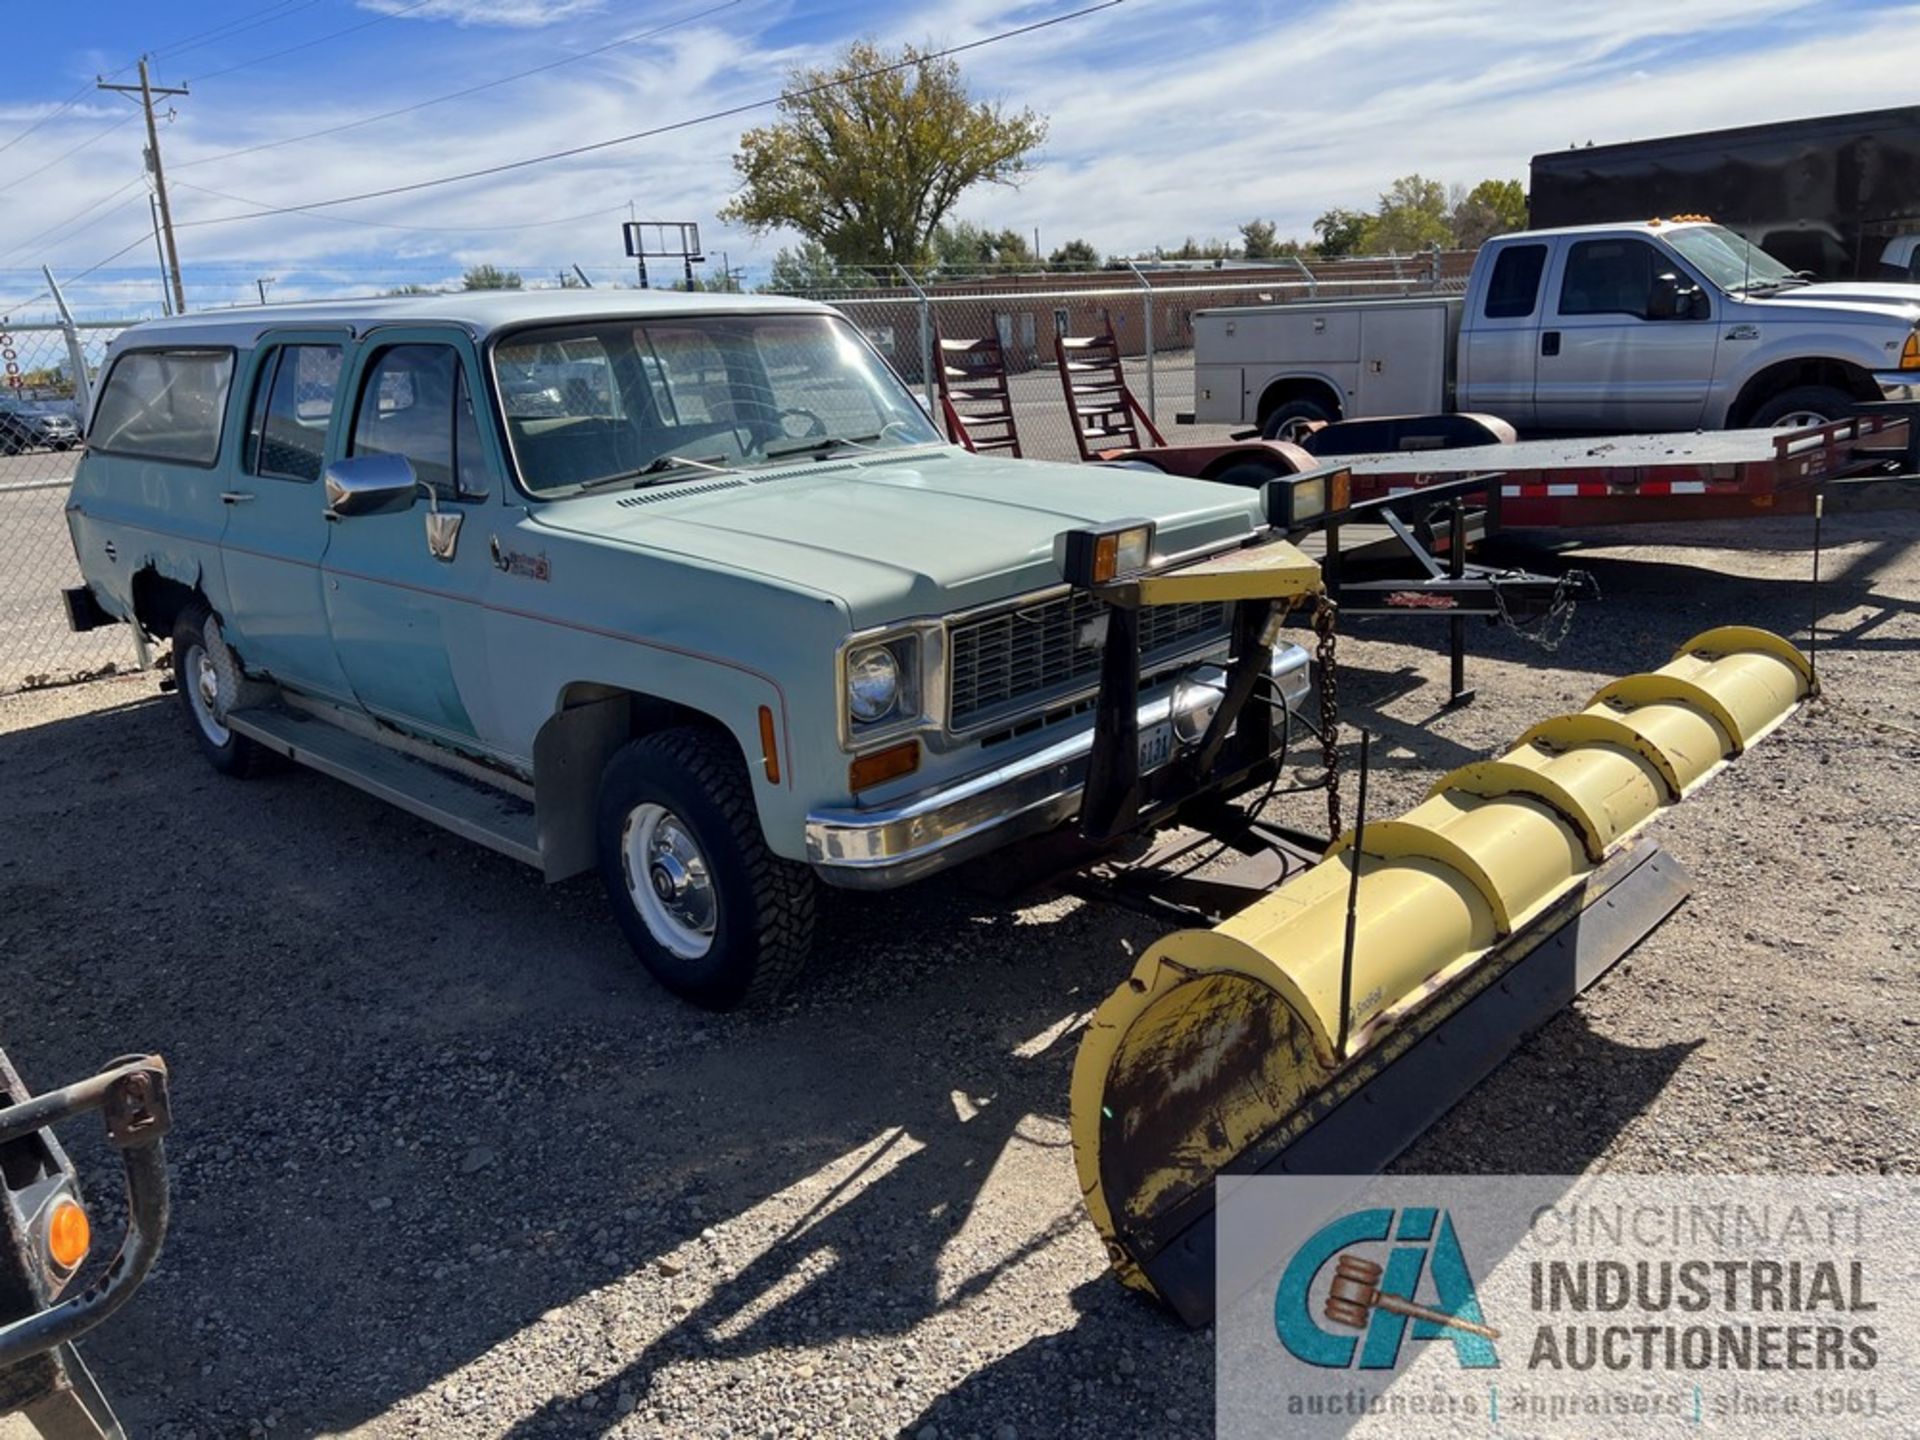 1978 CHEVY CUSTOM DELUX 2 WITH SNOW PLOW; VIN CKU268F128647, GASOLINE ENGINE, AUTOMATIC - Image 2 of 10